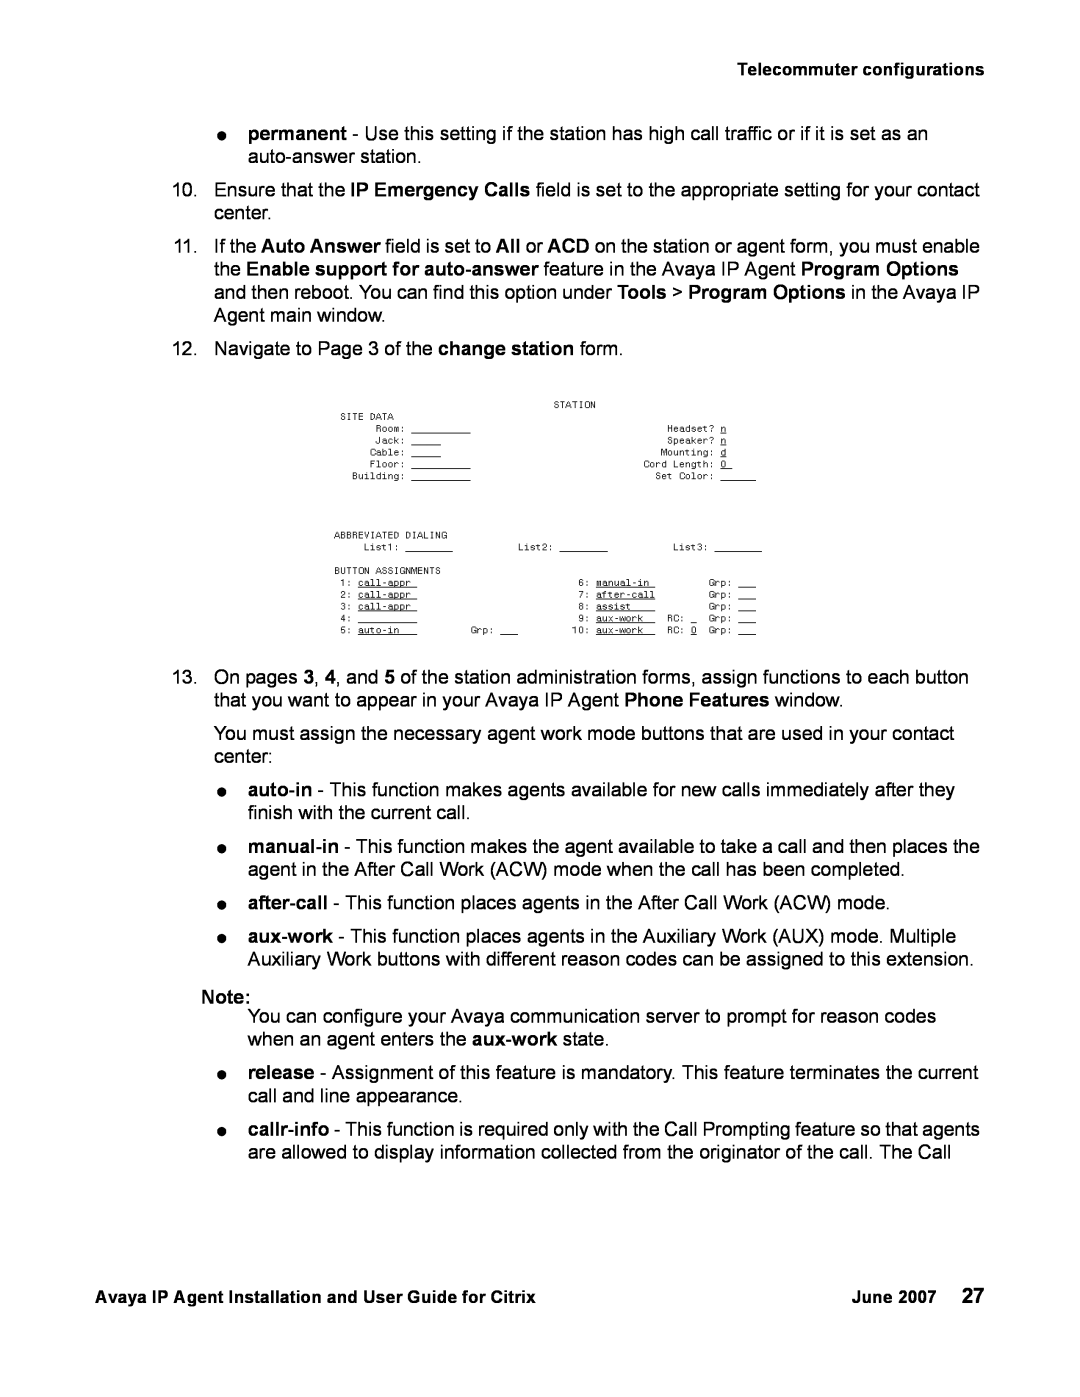 Avaya 7 manual Navigate to Page 3 of the change station form 